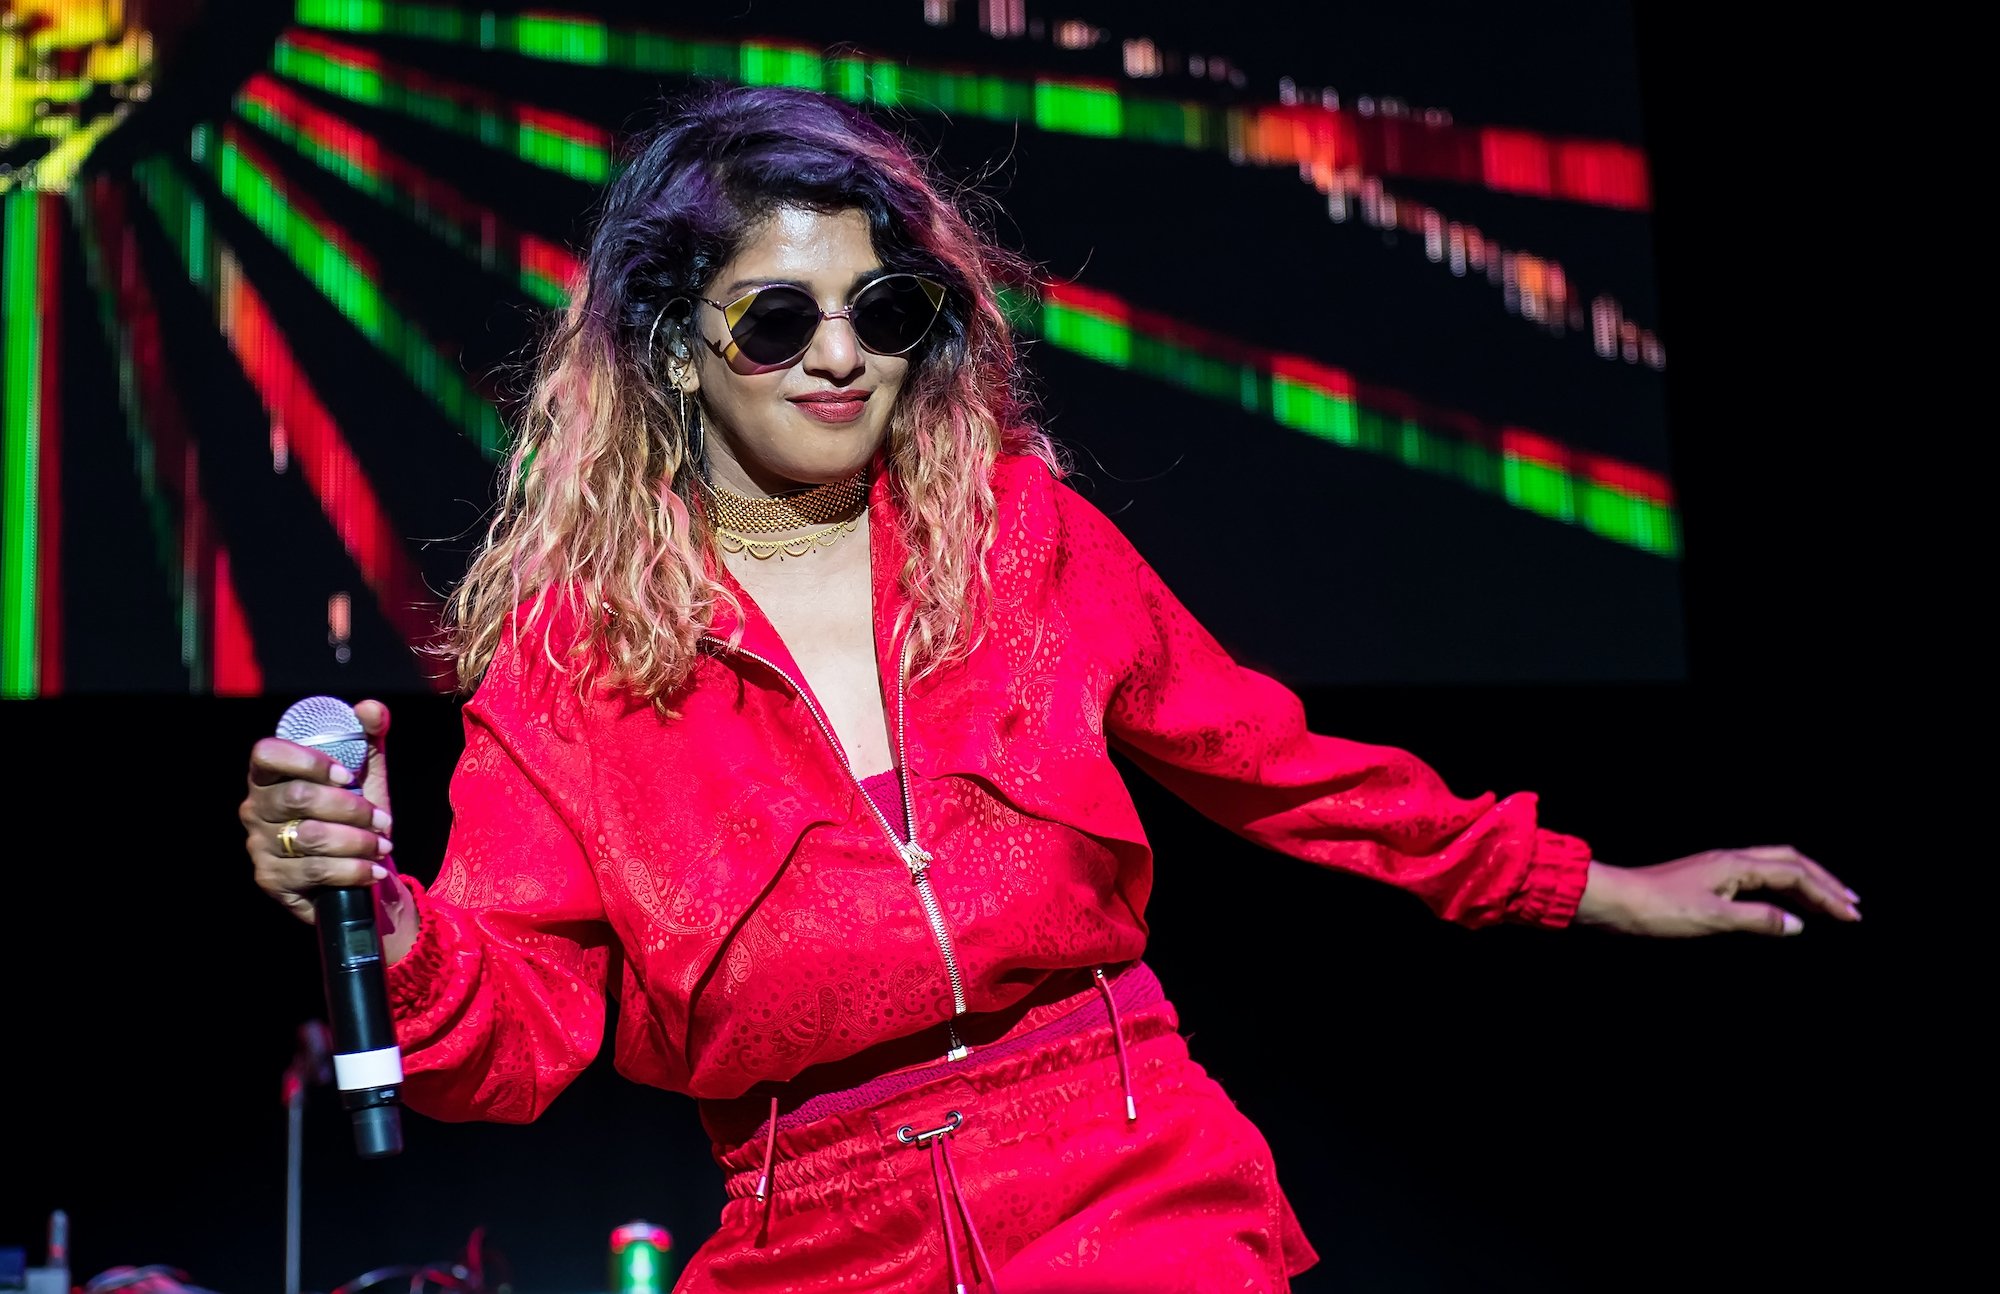 M.I.A smiling, holding a microphone on stage